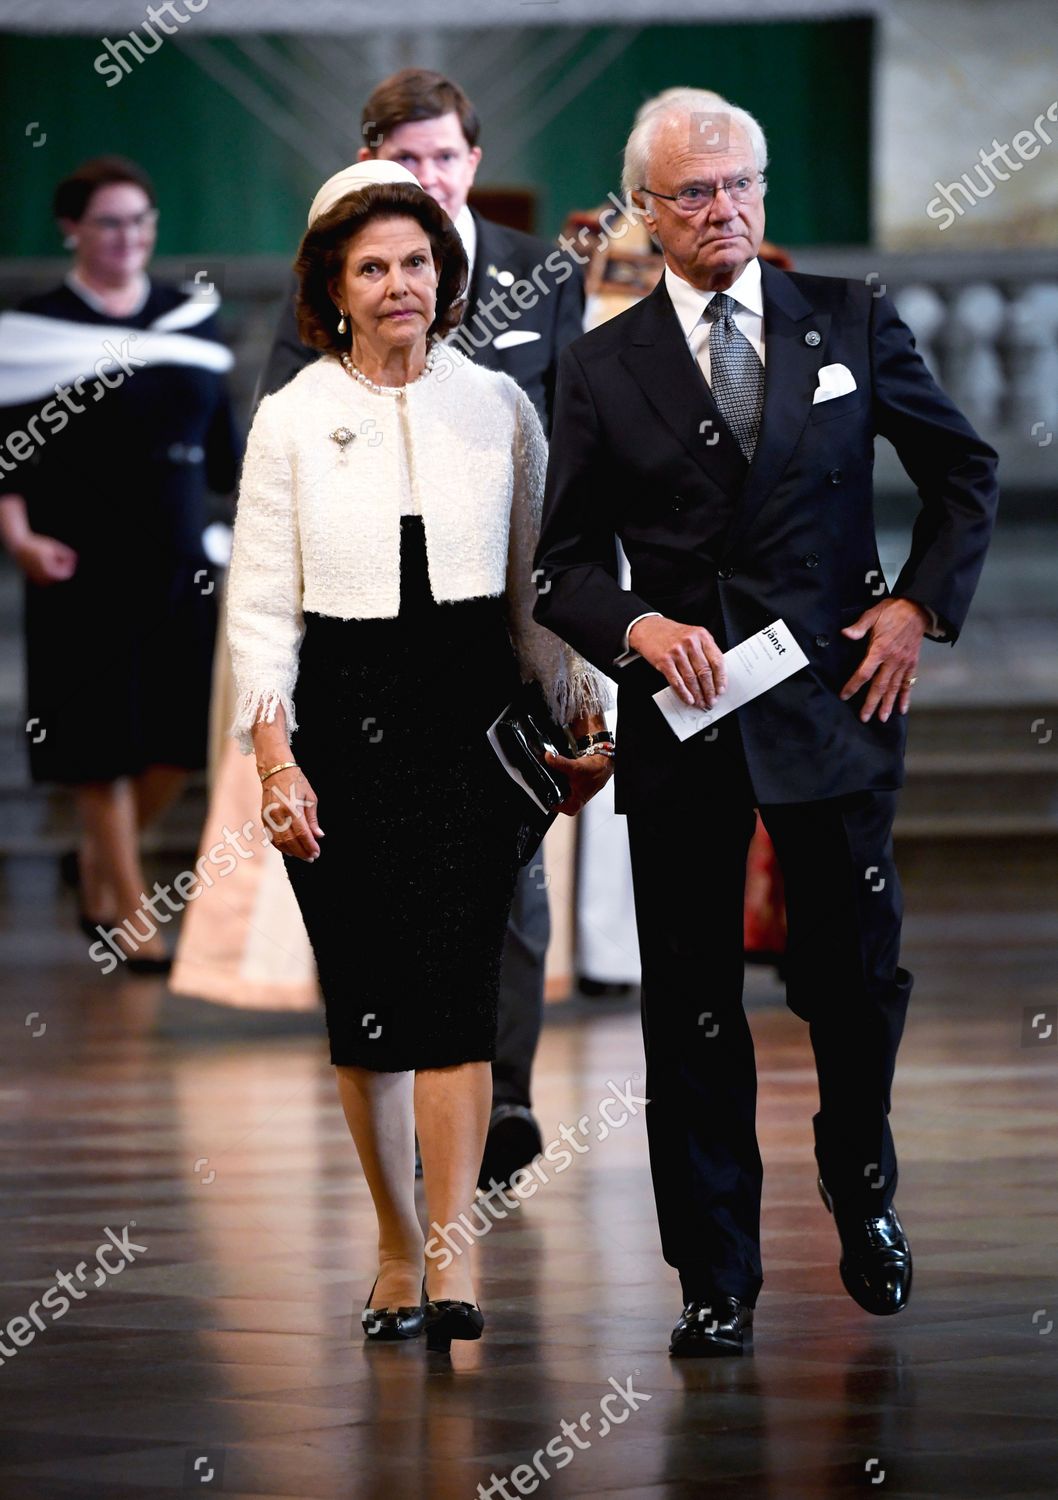 CASA REAL DE SUECIA - Página 62 Opening-of-the-parliamentary-session-stockholm-cathedral-stockholm-sweden-shutterstock-editorial-10769598v